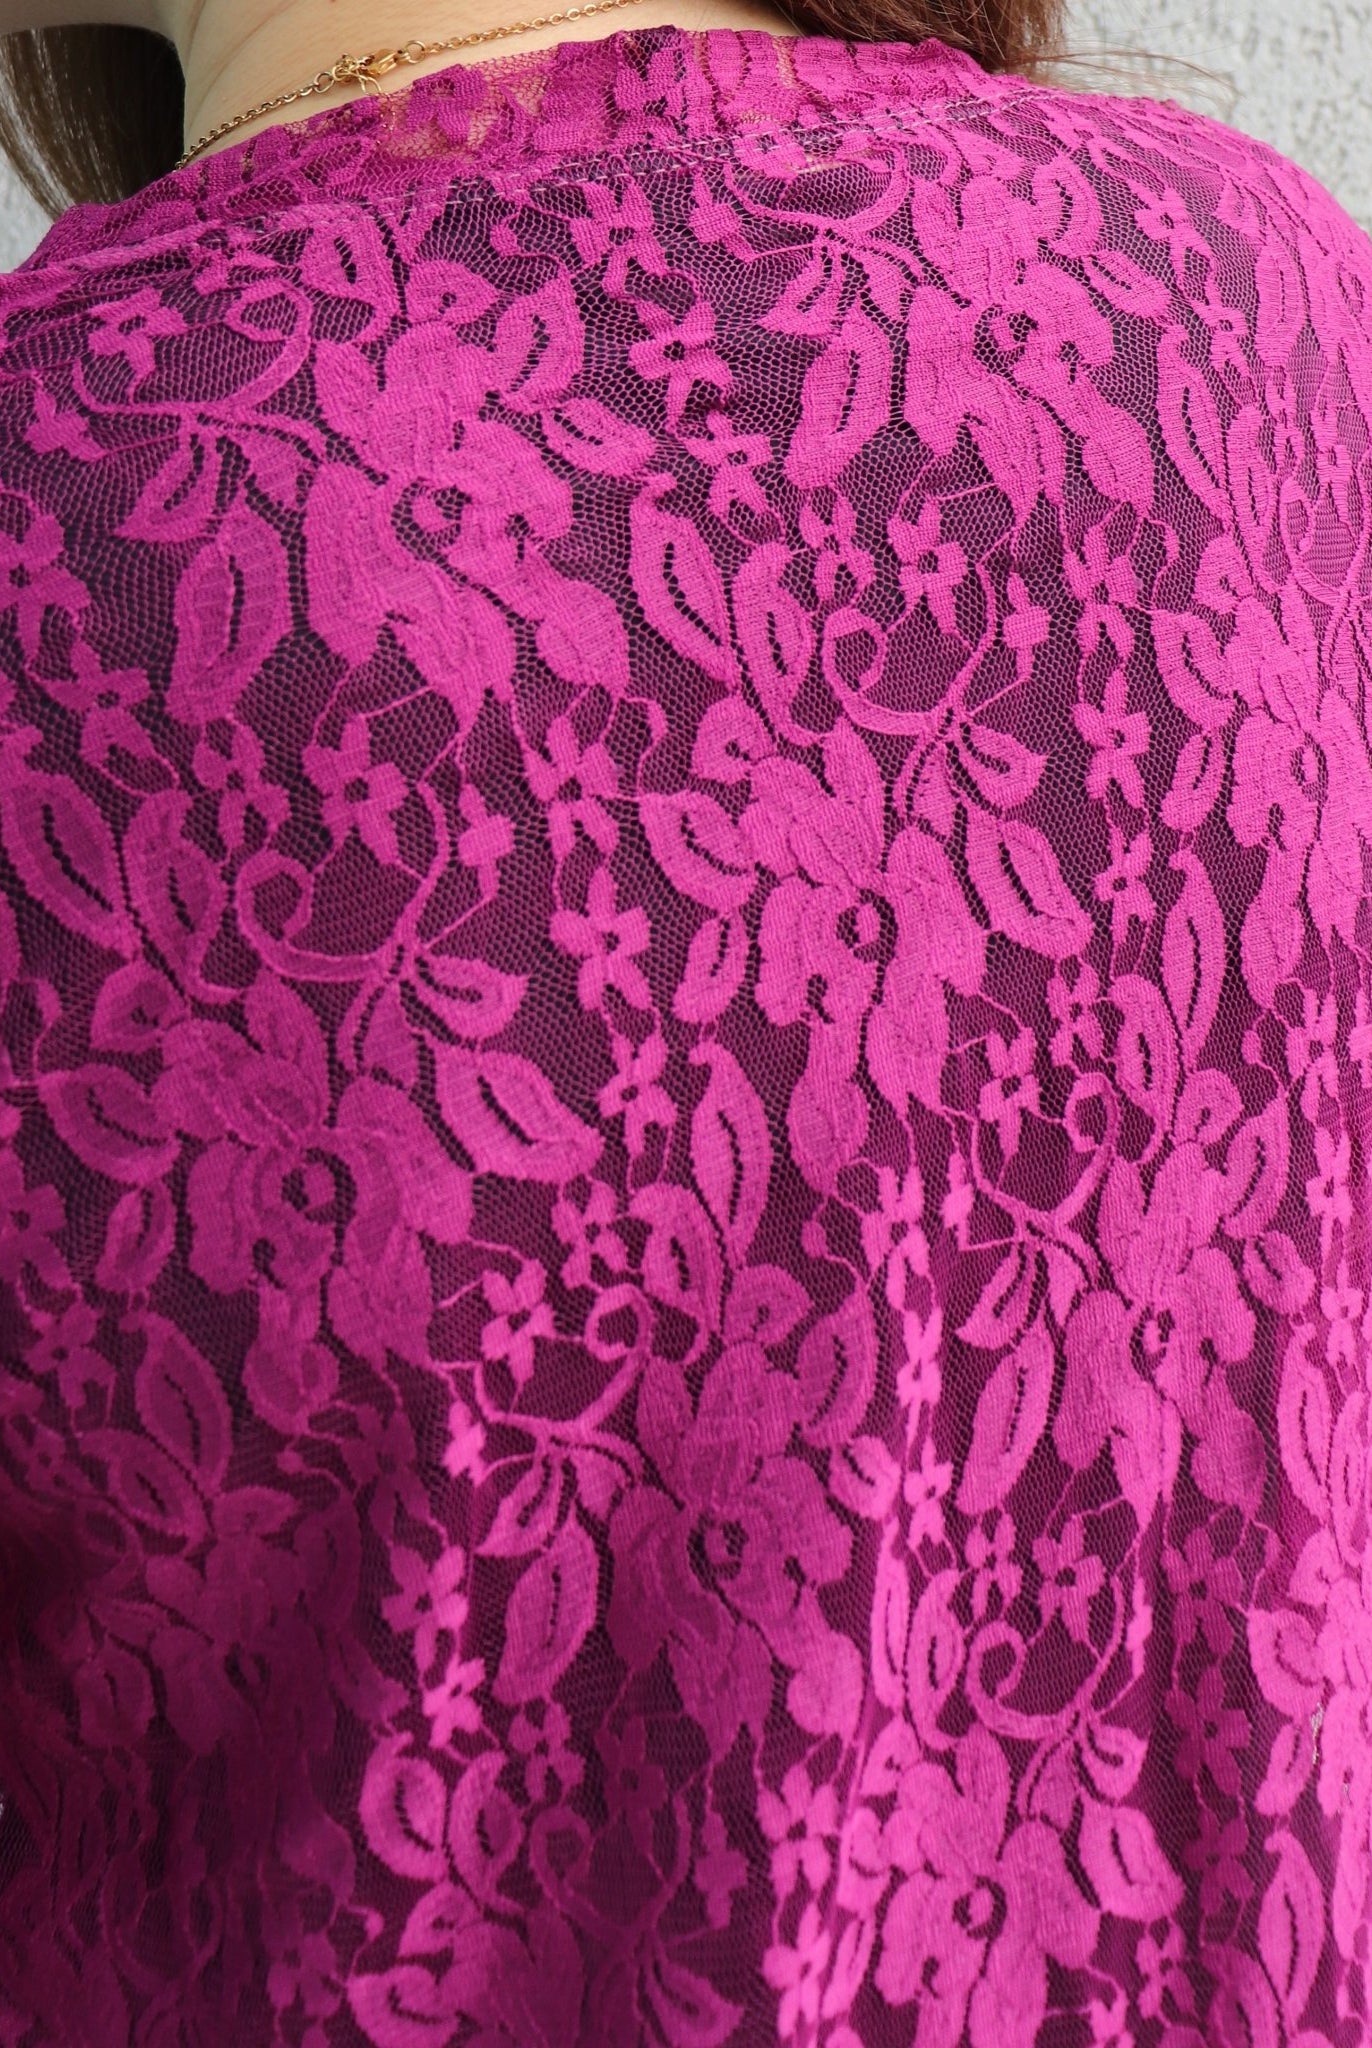 Whimsical Florals in Magenta. Stretch Lace. SL-116. - Boho Fabrics